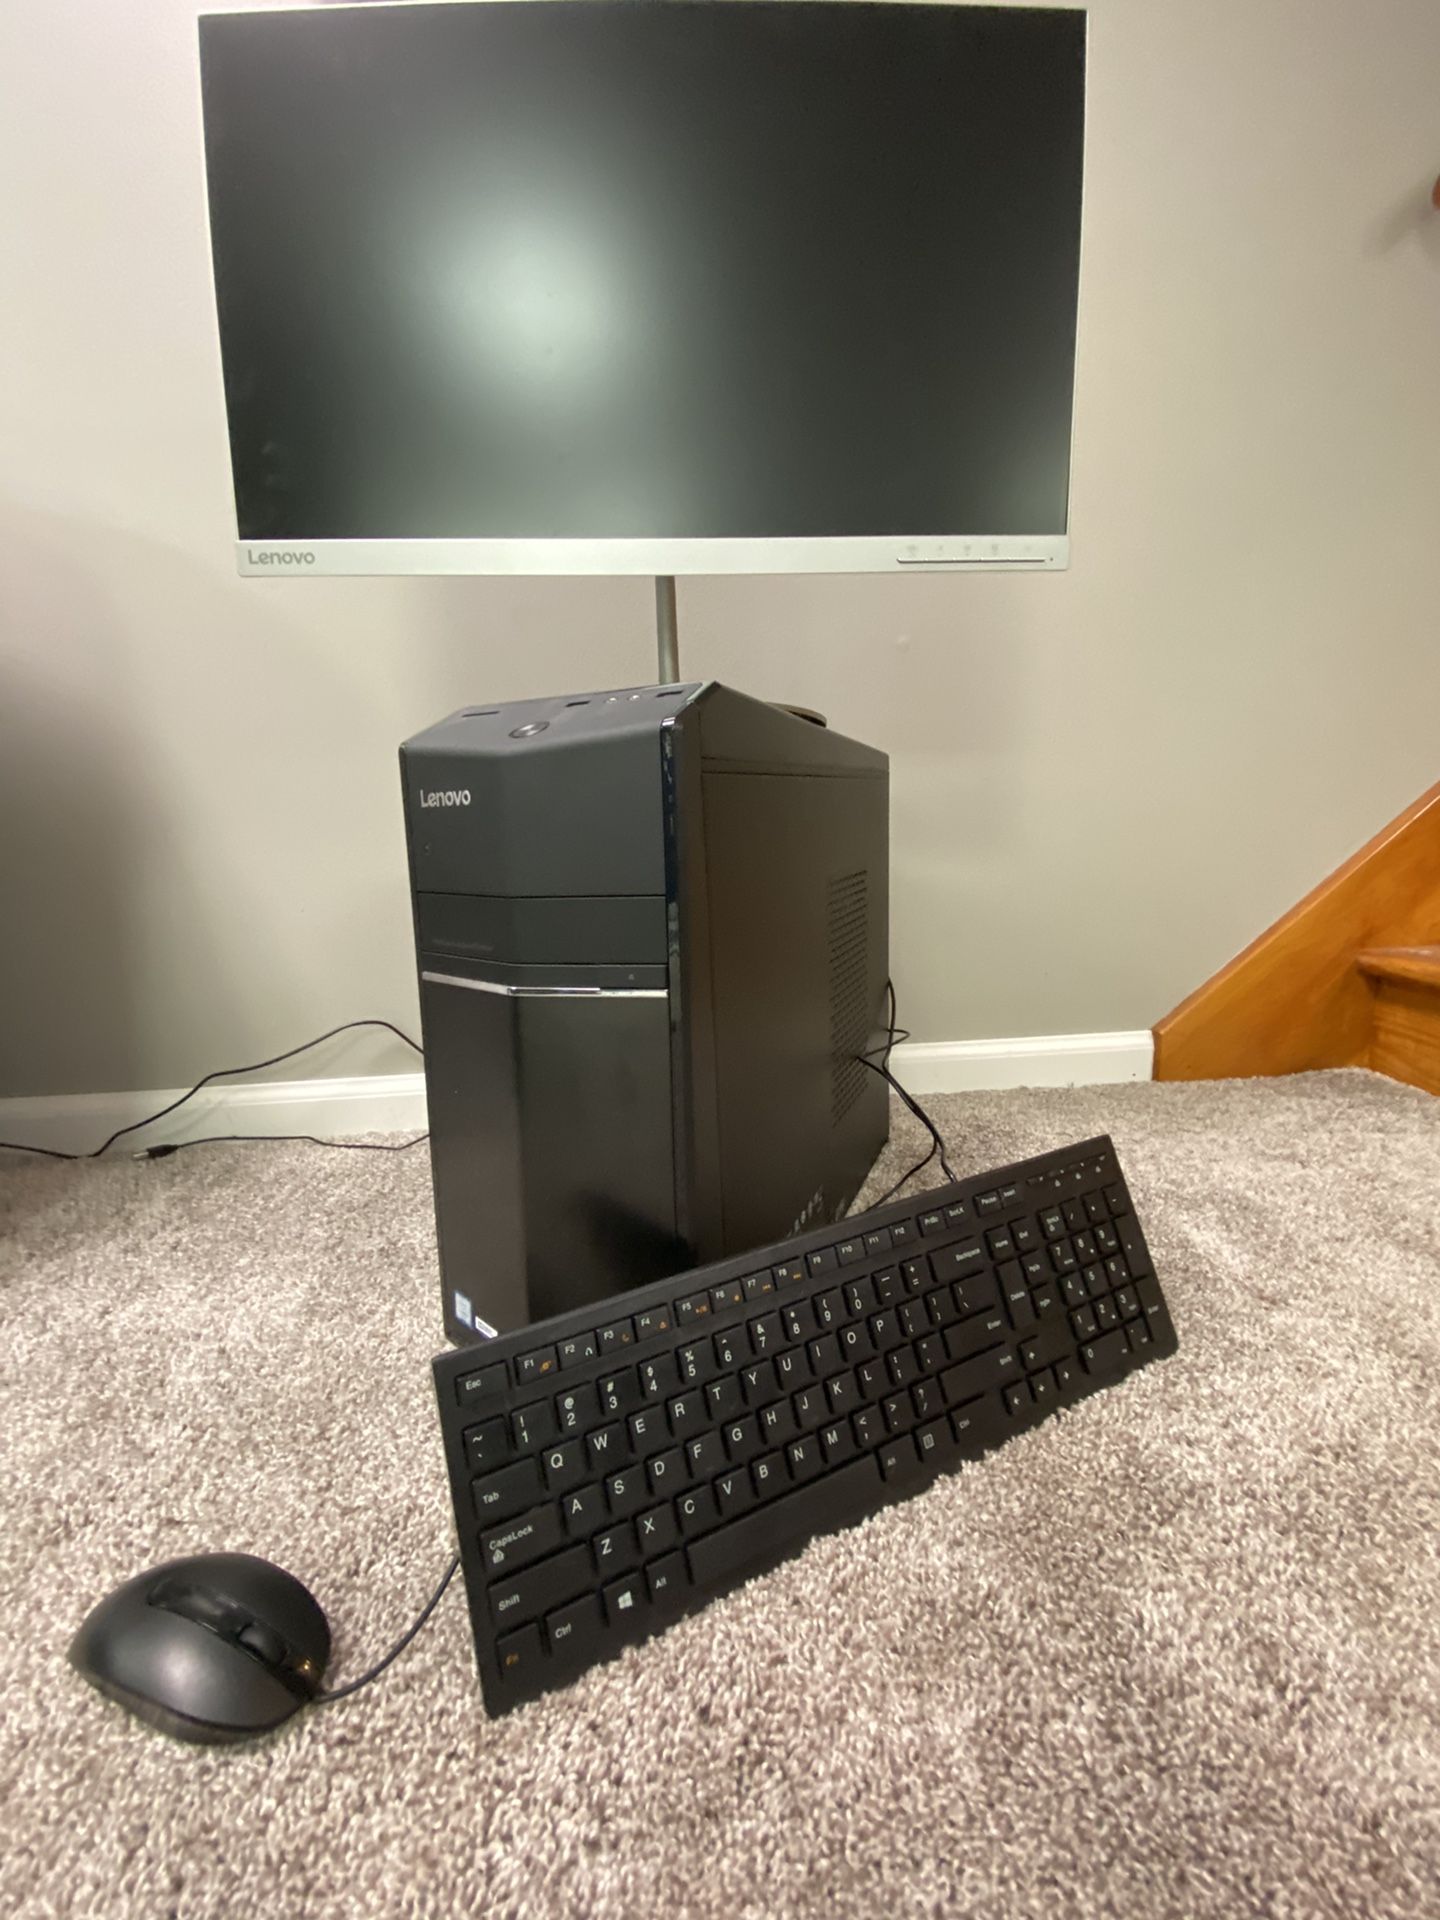 Windows 10 computer monitor and mouse